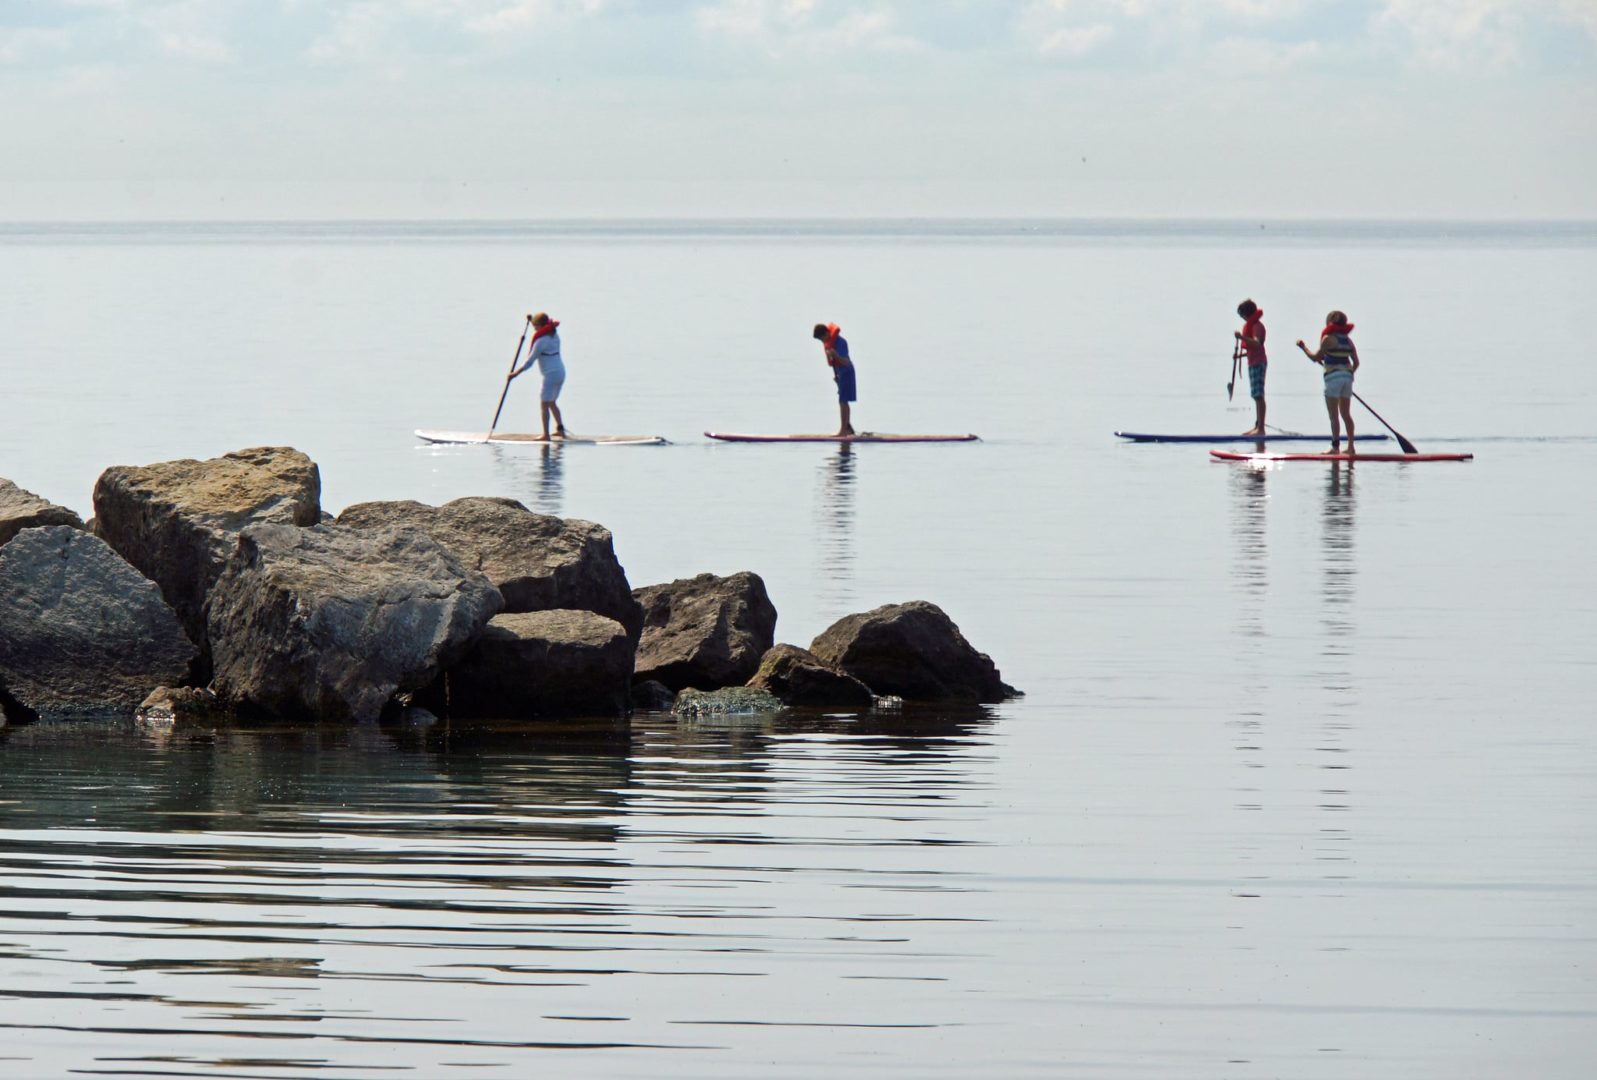 4 people paddle board on a still lake past a rocky shore.